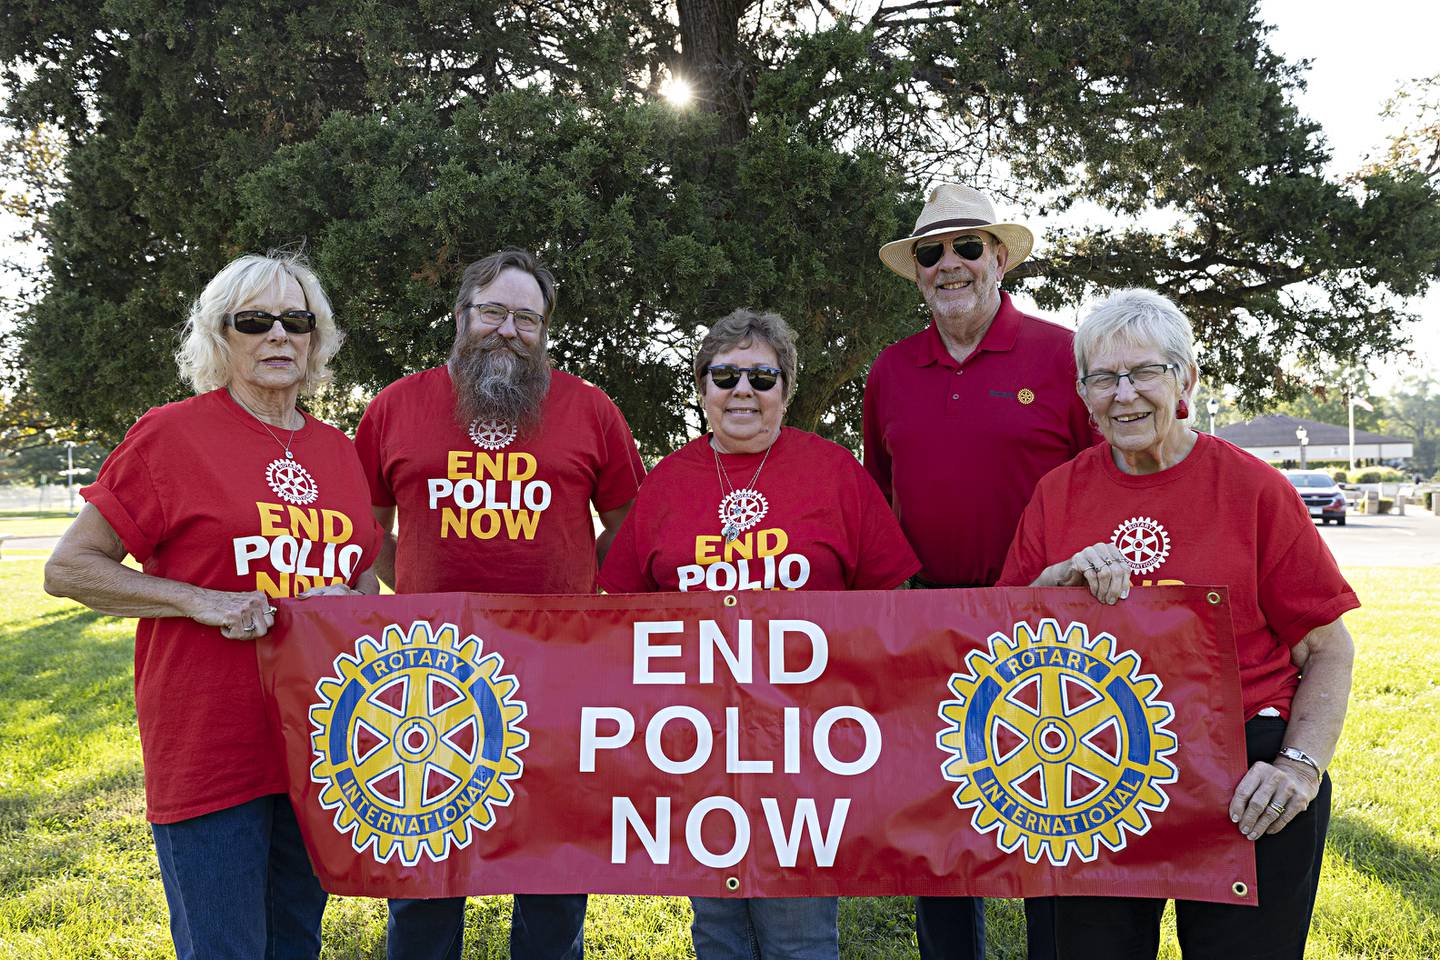 The eighth annual End Polio Now Walk will be held at Centennial Park along the Hennepin Canal on Saturday, October 7 rain or shine. Only lightning will cancel the event. Registration is free of charge beginning at 8:15 a.m.in the Larson Shelter with coffee and granola bars before the walk begins at 9:00 a.m. A short program on the progress of polio eradication efforts will be shared by hosting Rotarians and a group photo will be taken. Donations are welcomed and for a minimum of $25 a free T shirt will be given as long as the supply lasts. The event is sponsored by the Rotary Clubs of Dixon, Rock Falls, Sterling Noon, Walnut and SVCC Rotaract. Pictured: Cheryl Faber (left), Eric Epps, Sarah Willey, Bob Sondgeroth and Betty Clementz.